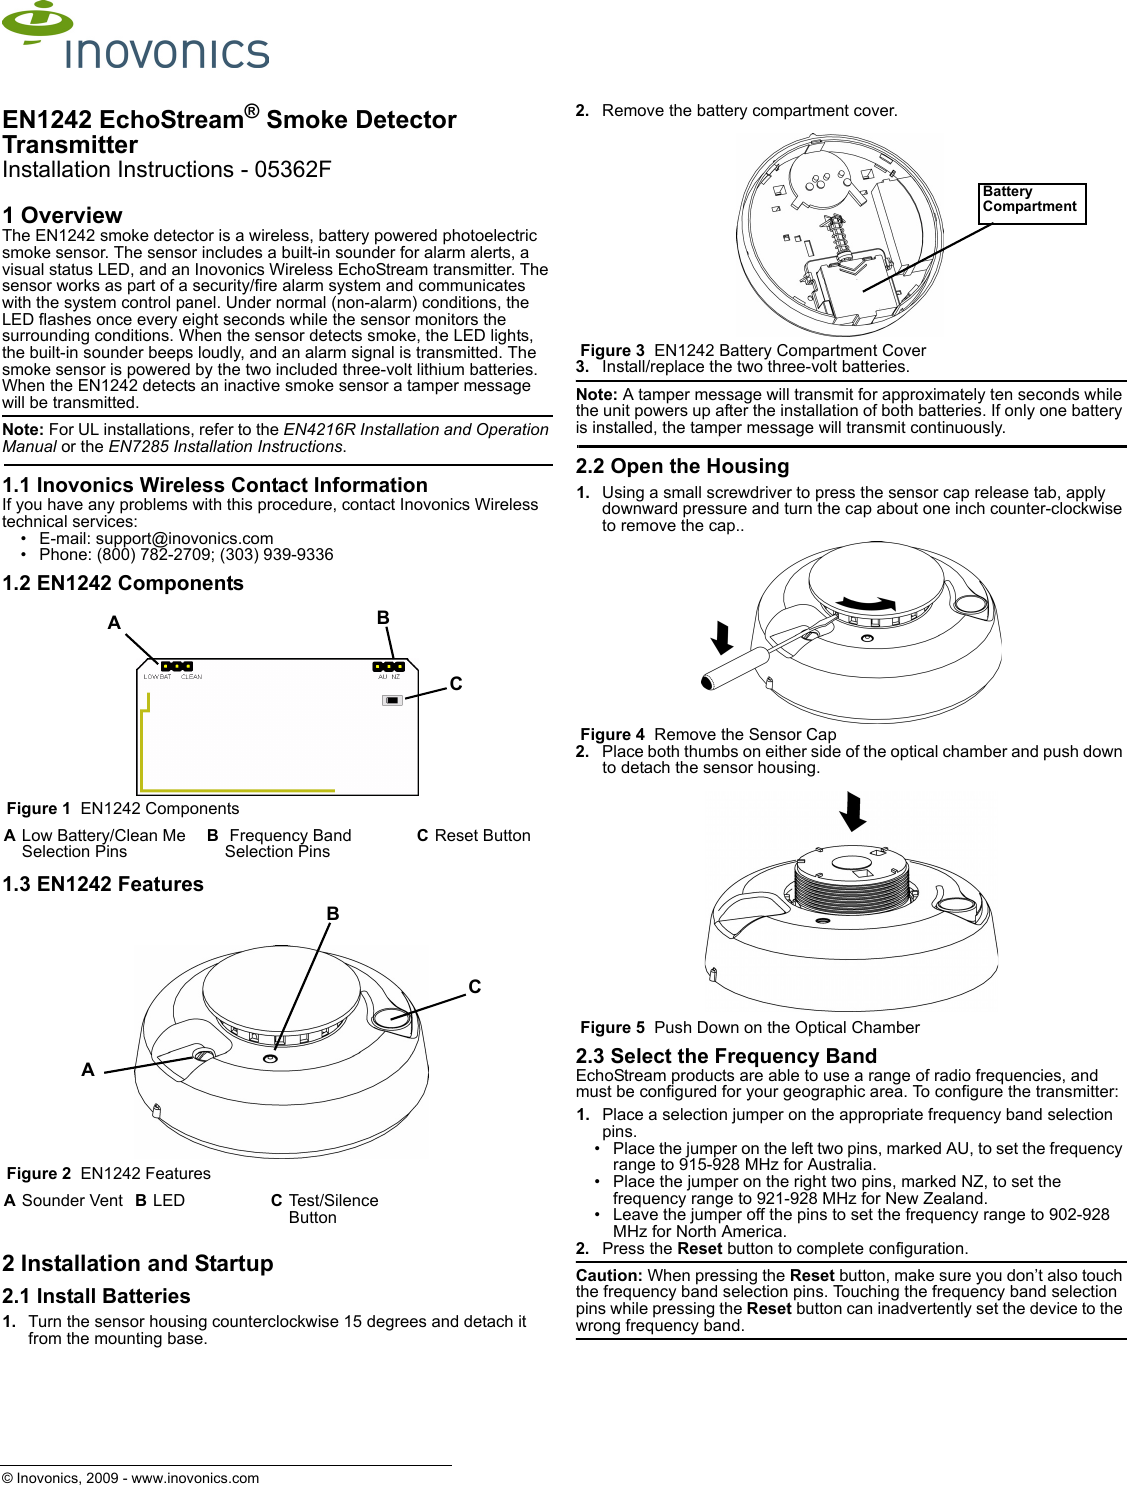 © Inovonics, 2009 - www.inovonics.comEN1242 EchoStream® Smoke Detector TransmitterInstallation Instructions - 05362F1 OverviewThe EN1242 smoke detector is a wireless, battery powered photoelectric smoke sensor. The sensor includes a built-in sounder for alarm alerts, a visual status LED, and an Inovonics Wireless EchoStream transmitter. The sensor works as part of a security/fire alarm system and communicates with the system control panel. Under normal (non-alarm) conditions, the LED flashes once every eight seconds while the sensor monitors the surrounding conditions. When the sensor detects smoke, the LED lights, the built-in sounder beeps loudly, and an alarm signal is transmitted. The smoke sensor is powered by the two included three-volt lithium batteries. When the EN1242 detects an inactive smoke sensor a tamper message will be transmitted.Note: For UL installations, refer to the EN4216R Installation and Operation Manual or the EN7285 Installation Instructions.1.1 Inovonics Wireless Contact InformationIf you have any problems with this procedure, contact Inovonics Wireless technical services:• E-mail: support@inovonics.com• Phone: (800) 782-2709; (303) 939-93361.2 EN1242 Components Figure 1  EN1242 Components1.3 EN1242 Features Figure 2  EN1242 Features2 Installation and Startup2.1 Install Batteries1. Turn the sensor housing counterclockwise 15 degrees and detach it from the mounting base.2. Remove the battery compartment cover. Figure 3  EN1242 Battery Compartment Cover3. Install/replace the two three-volt batteries. Note: A tamper message will transmit for approximately ten seconds while the unit powers up after the installation of both batteries. If only one battery is installed, the tamper message will transmit continuously.2.2 Open the Housing1. Using a small screwdriver to press the sensor cap release tab, apply downward pressure and turn the cap about one inch counter-clockwise to remove the cap.. Figure 4  Remove the Sensor Cap2. Place both thumbs on either side of the optical chamber and push down to detach the sensor housing. Figure 5  Push Down on the Optical Chamber2.3 Select the Frequency BandEchoStream products are able to use a range of radio frequencies, and must be configured for your geographic area. To configure the transmitter:1. Place a selection jumper on the appropriate frequency band selection pins.• Place the jumper on the left two pins, marked AU, to set the frequency range to 915-928 MHz for Australia.• Place the jumper on the right two pins, marked NZ, to set the frequency range to 921-928 MHz for New Zealand.• Leave the jumper off the pins to set the frequency range to 902-928 MHz for North America.2. Press the Reset button to complete configuration.Caution: When pressing the Reset button, make sure you don’t also touch the frequency band selection pins. Touching the frequency band selection pins while pressing the Reset button can inadvertently set the device to the wrong frequency band.ALow Battery/Clean Me Selection PinsB Frequency Band Selection PinsCReset ButtonASounder Vent BLED CTest/Silence ButtonABCACBBattery Compartment 